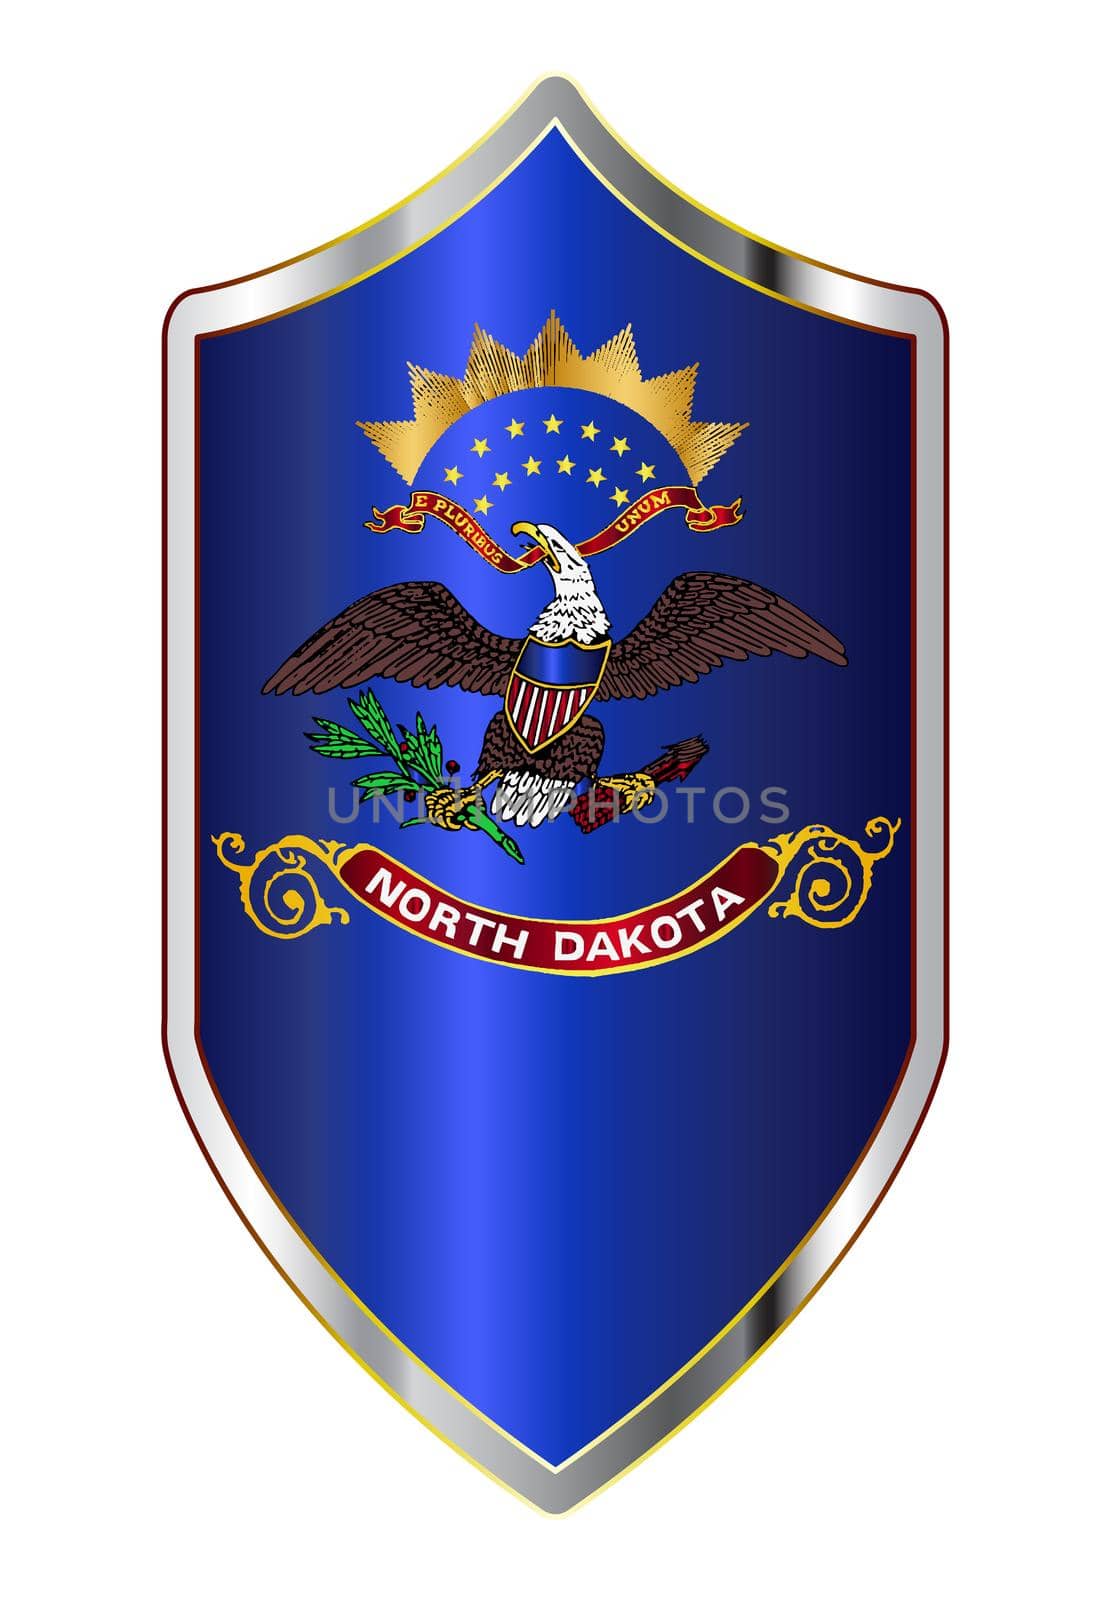 A typical crusader type shield with the state flag of North Dakota all isolated on a white background